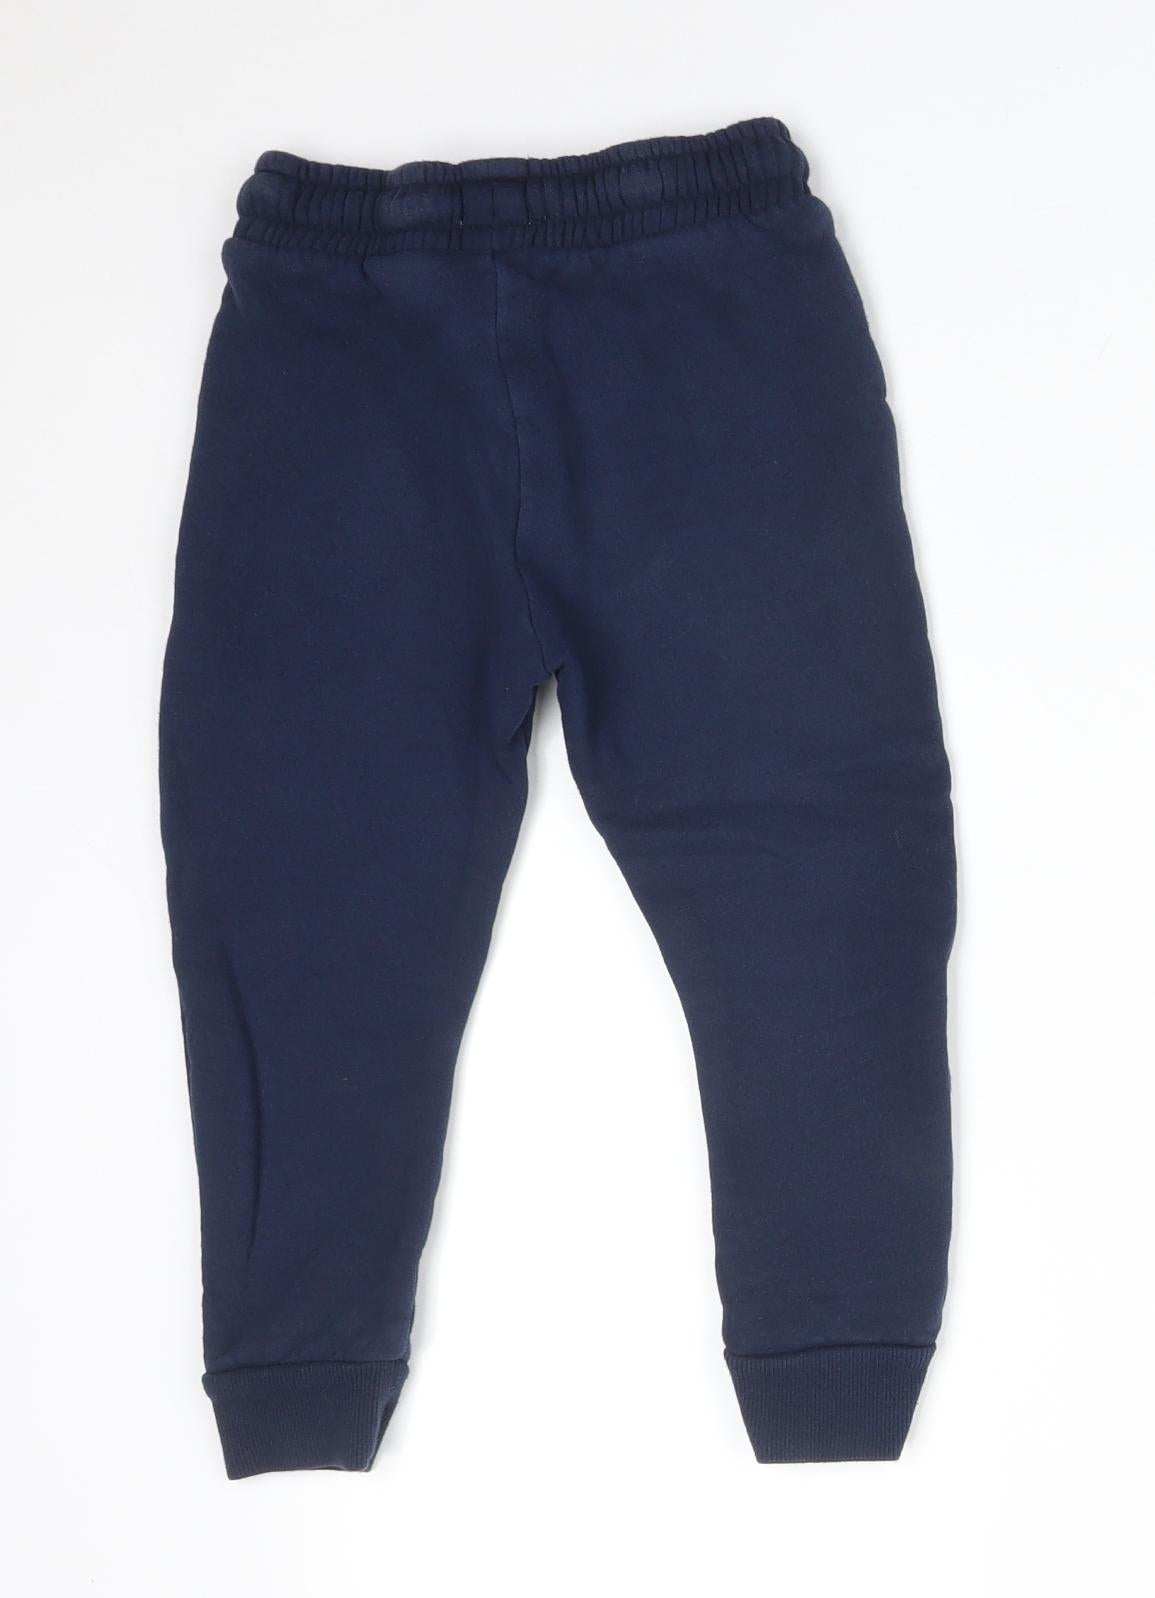 F&F Boys Blue  Cotton Jogger Trousers Size 3-4 Years  Regular